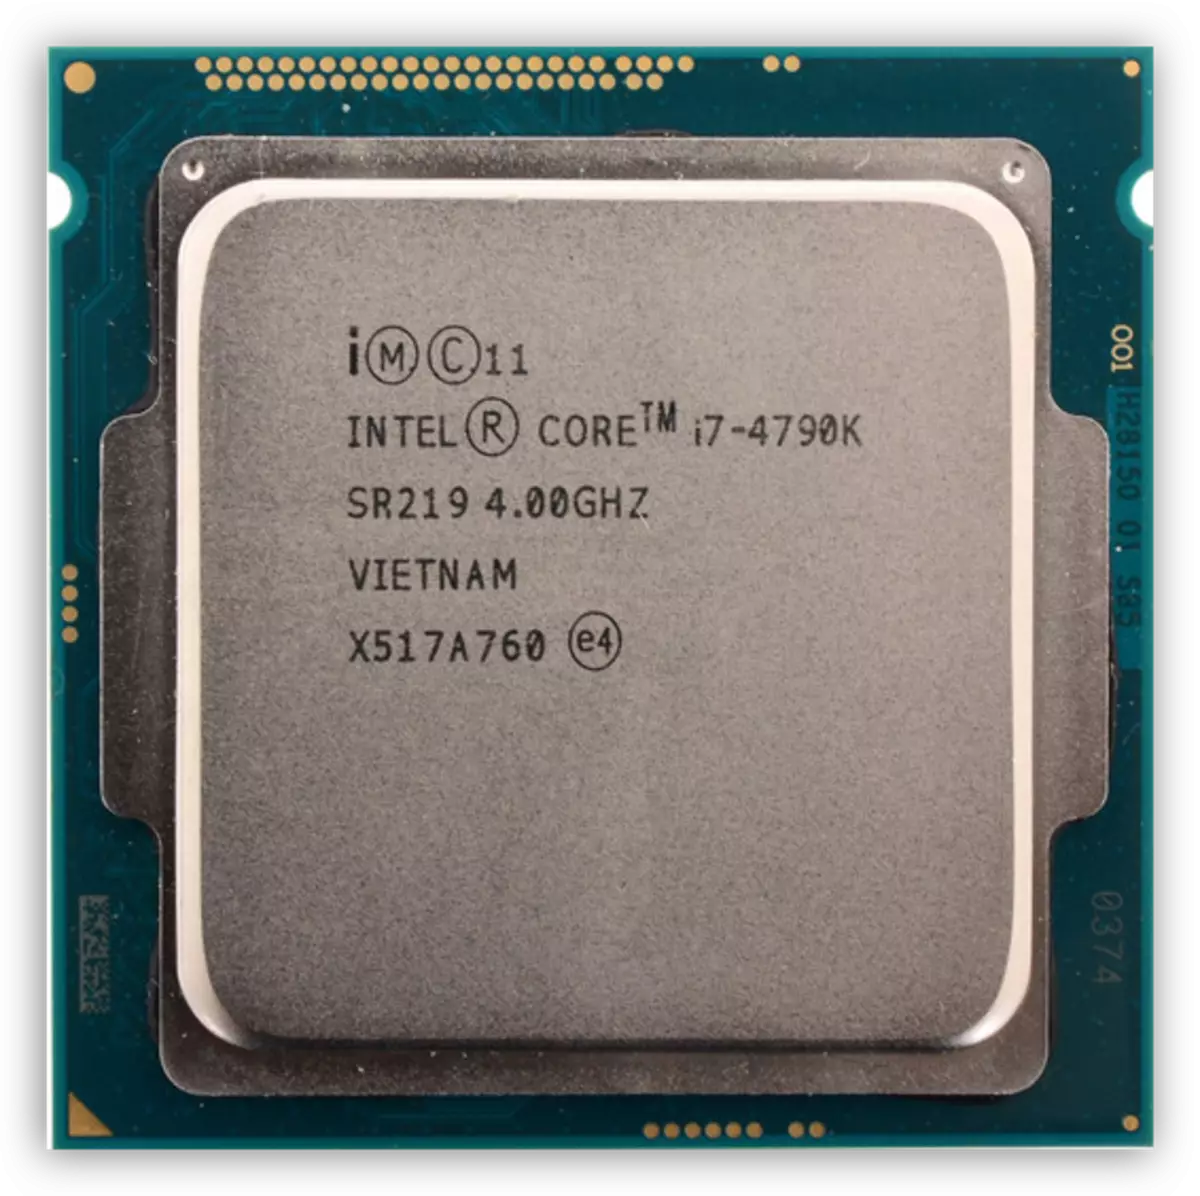 Core i7-4790k processor sa architecture ng Haswell.